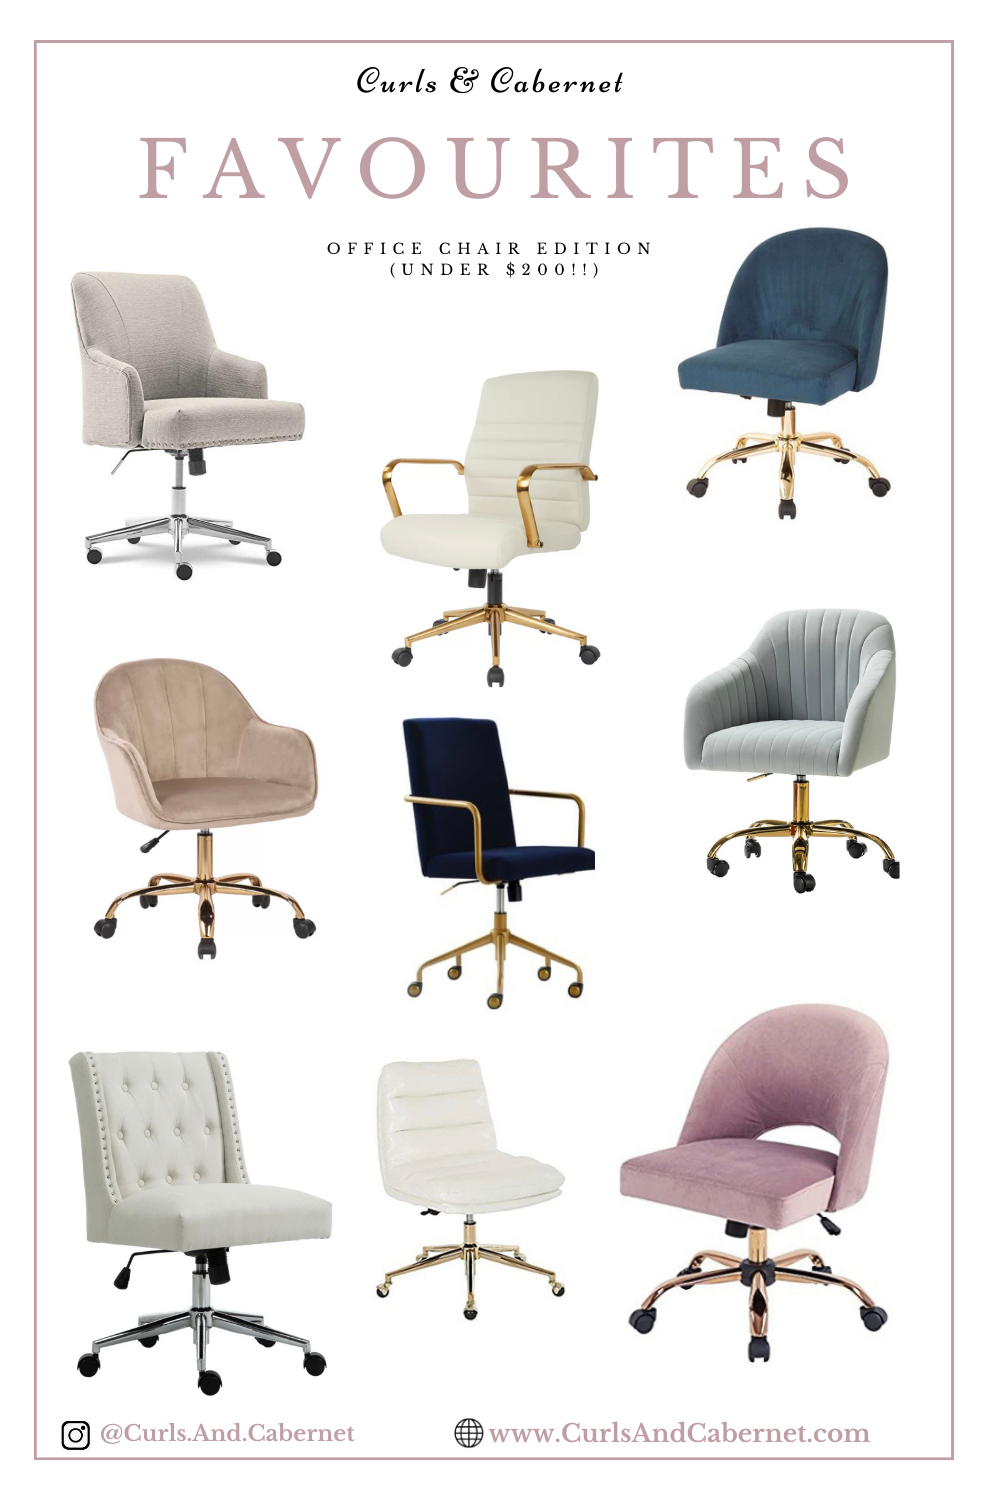 Favourite: Affordable Chic & Beautiful Office Chairs!